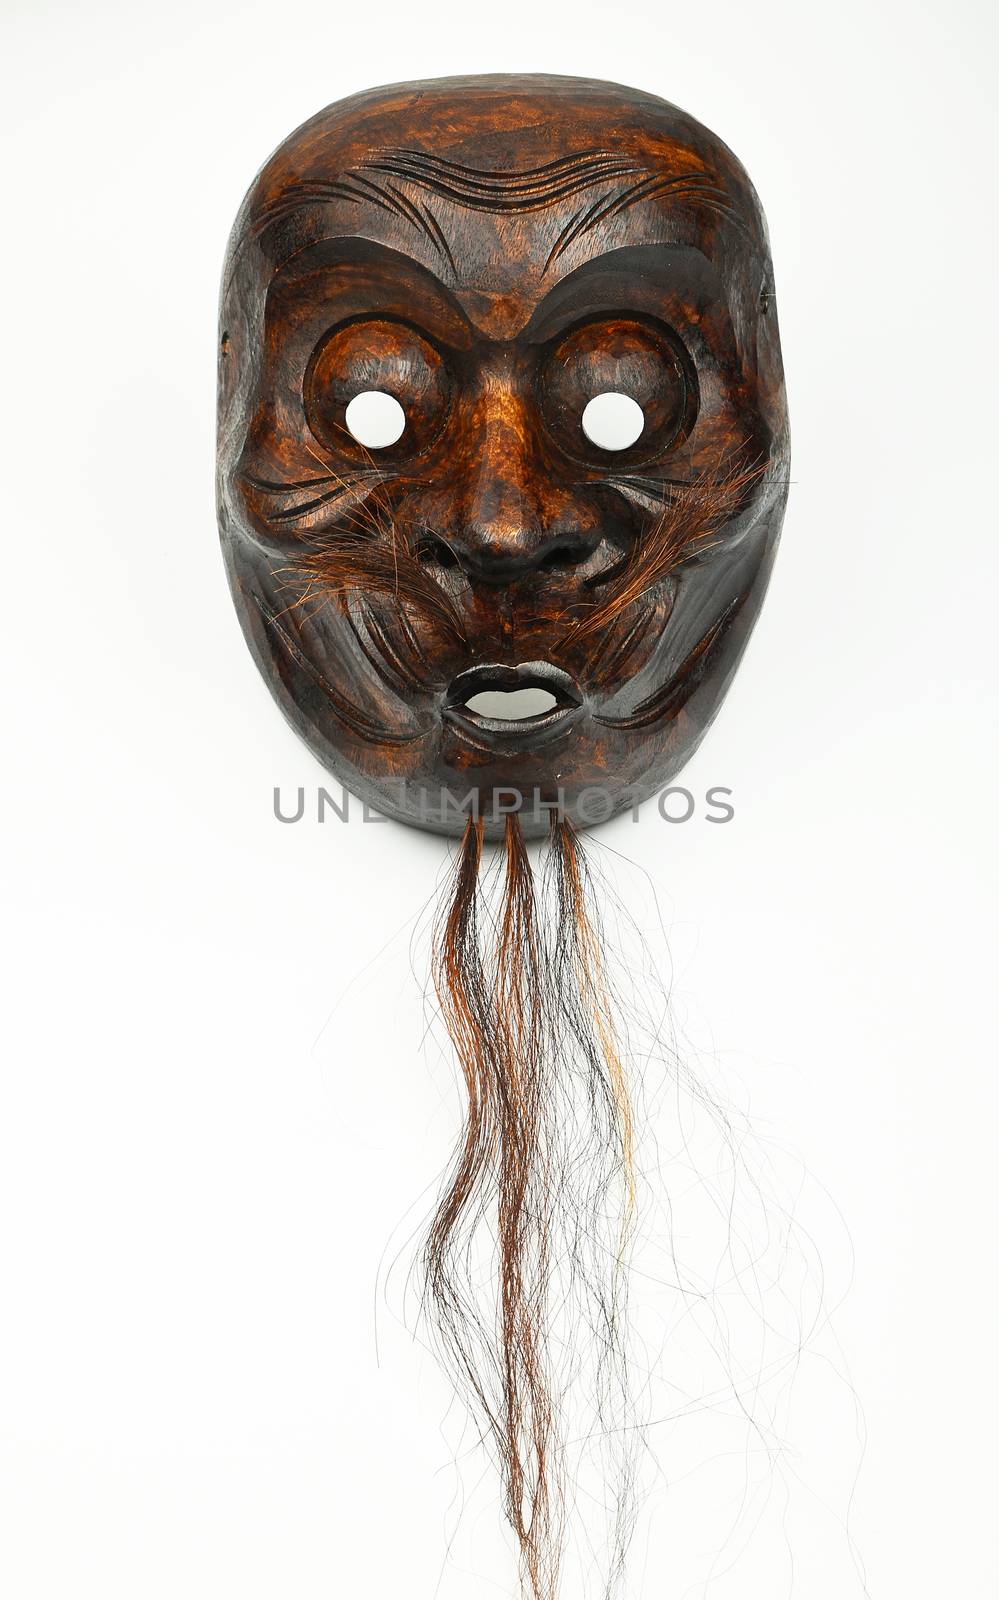 Japanese wooden theater human face mask isolated on white by BreakingTheWalls